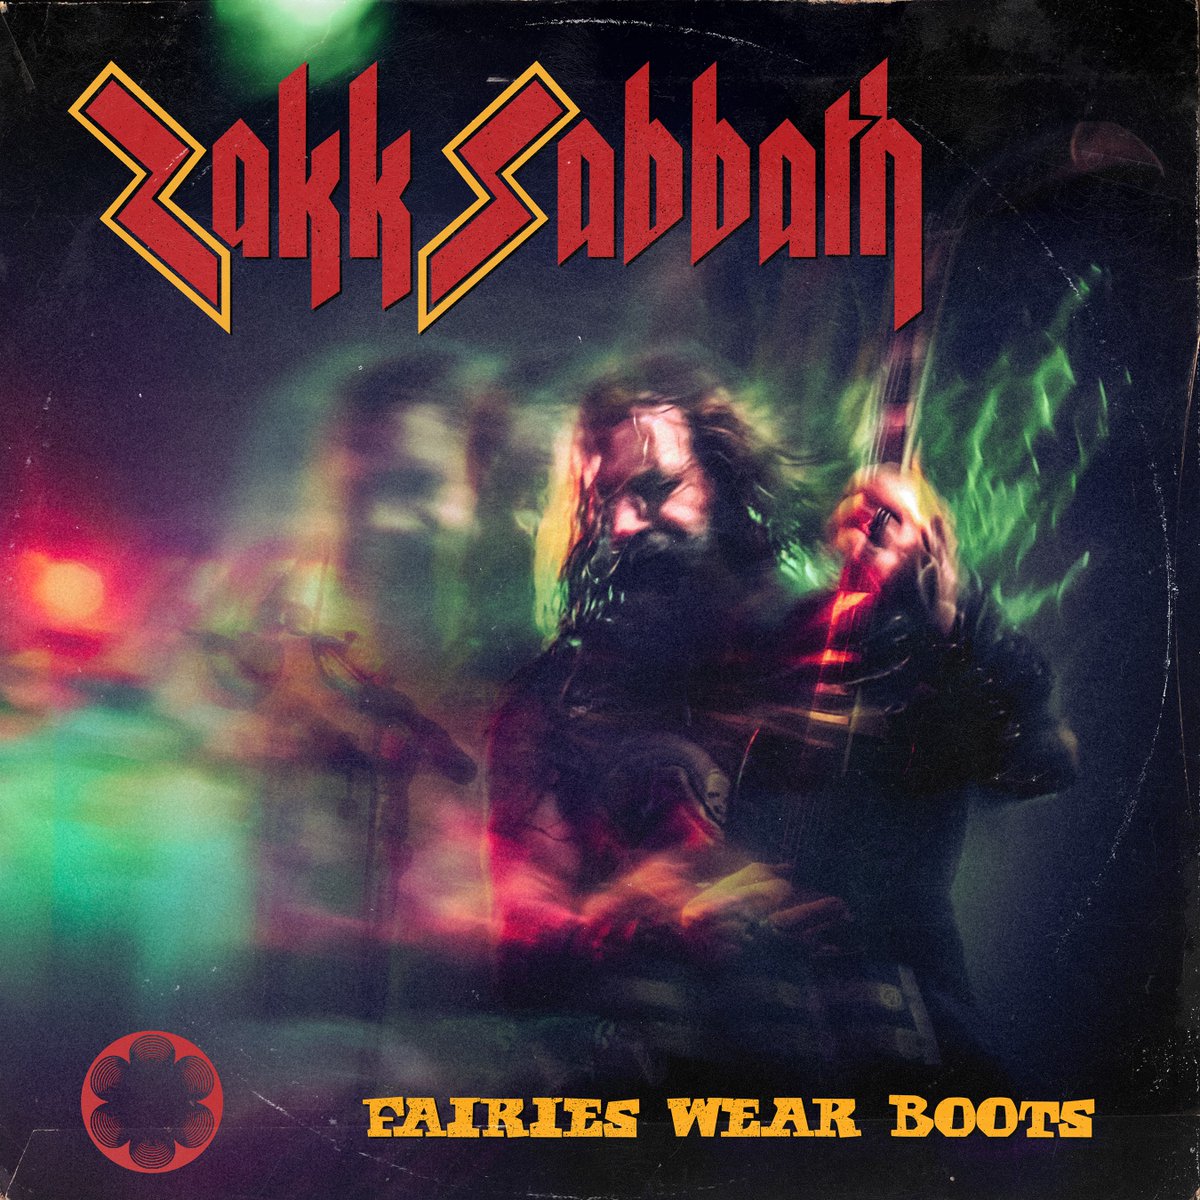 Shipping now from our shop: @zakk_sabbath's exclusive limited 7-inch single 'Fairies Wear Boots'. Get your dose of ultimate @blacksabbath worship now: lnk.spkr.media/fairies-wear-b…